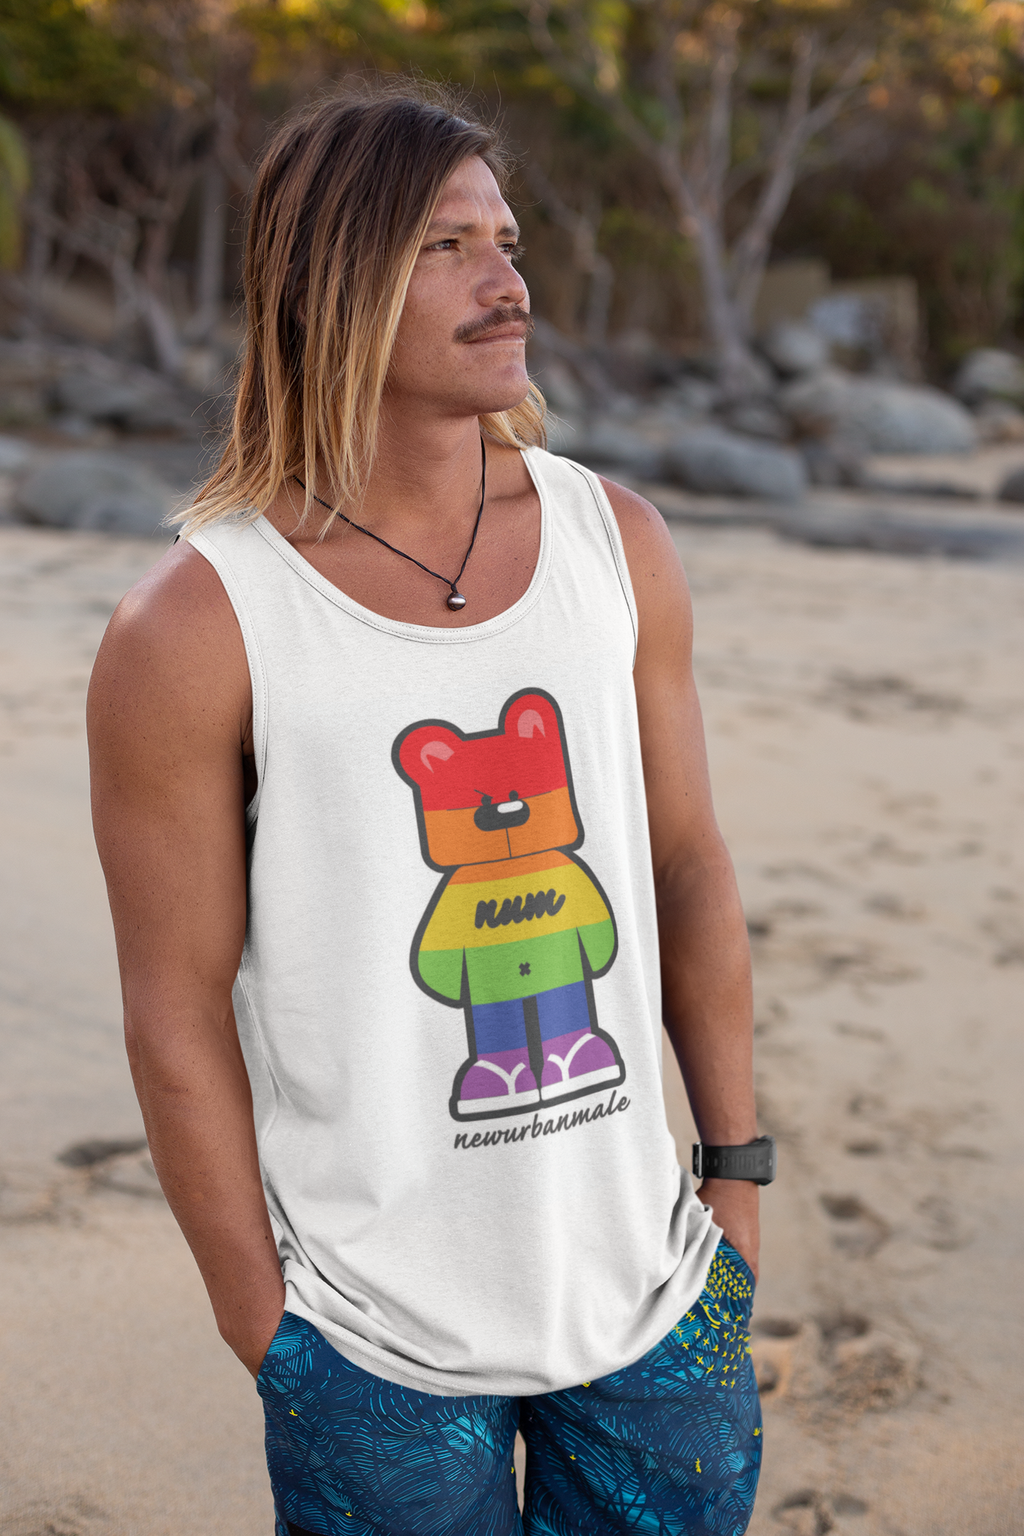 tank-top-mockup-of-a-cool-surfer-man-at-the-beach-26837 (1).png